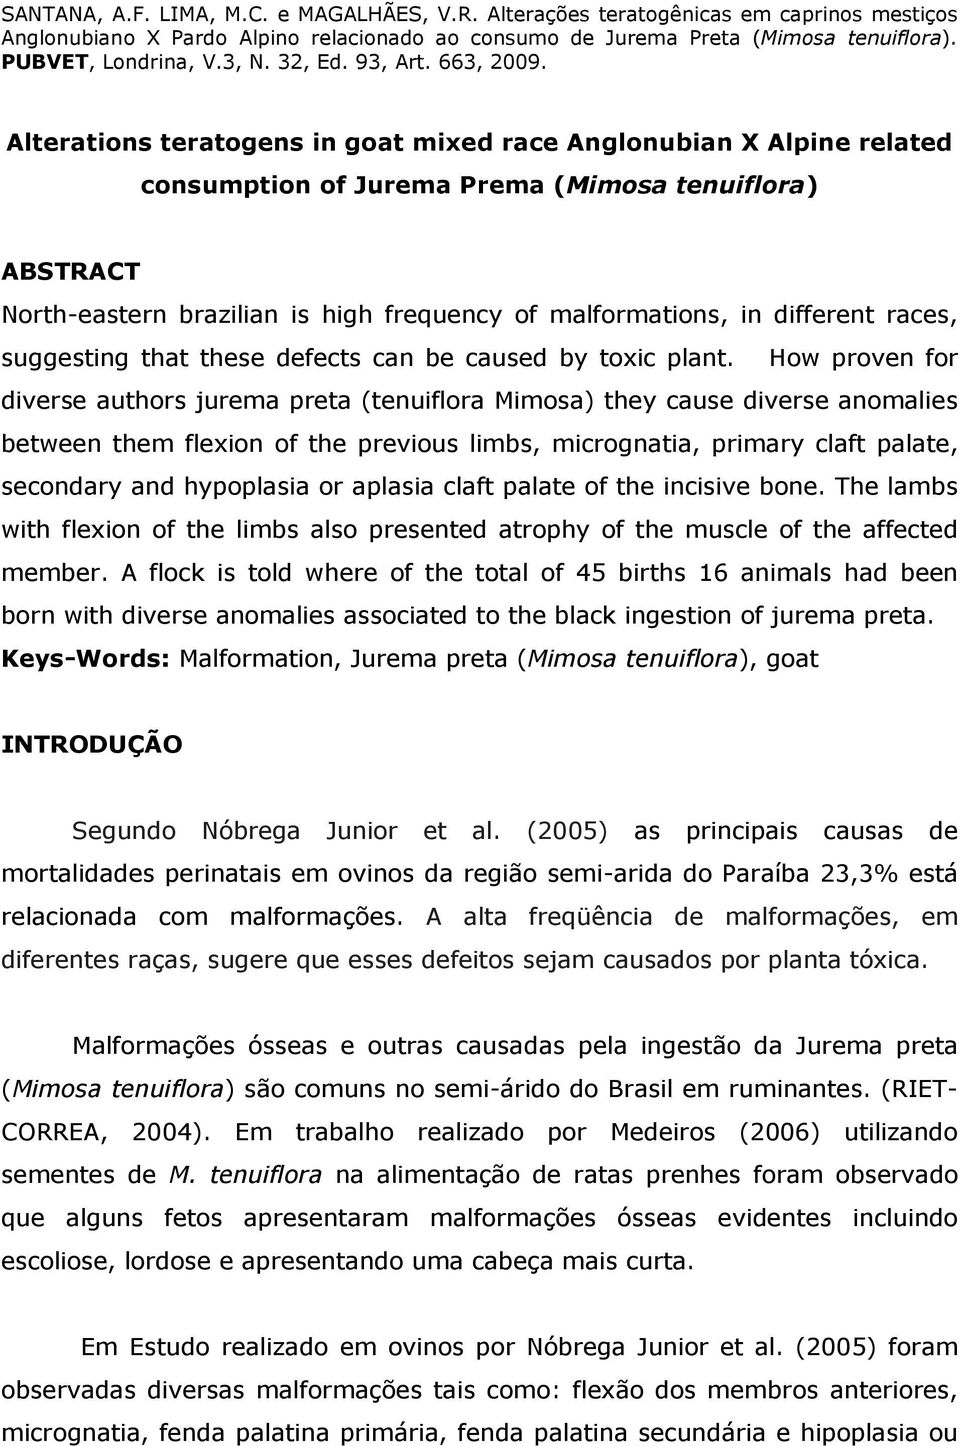 How proven for diverse authors jurema preta (tenuiflora Mimosa) they cause diverse anomalies between them flexion of the previous limbs, micrognatia, primary claft palate, secondary and hypoplasia or